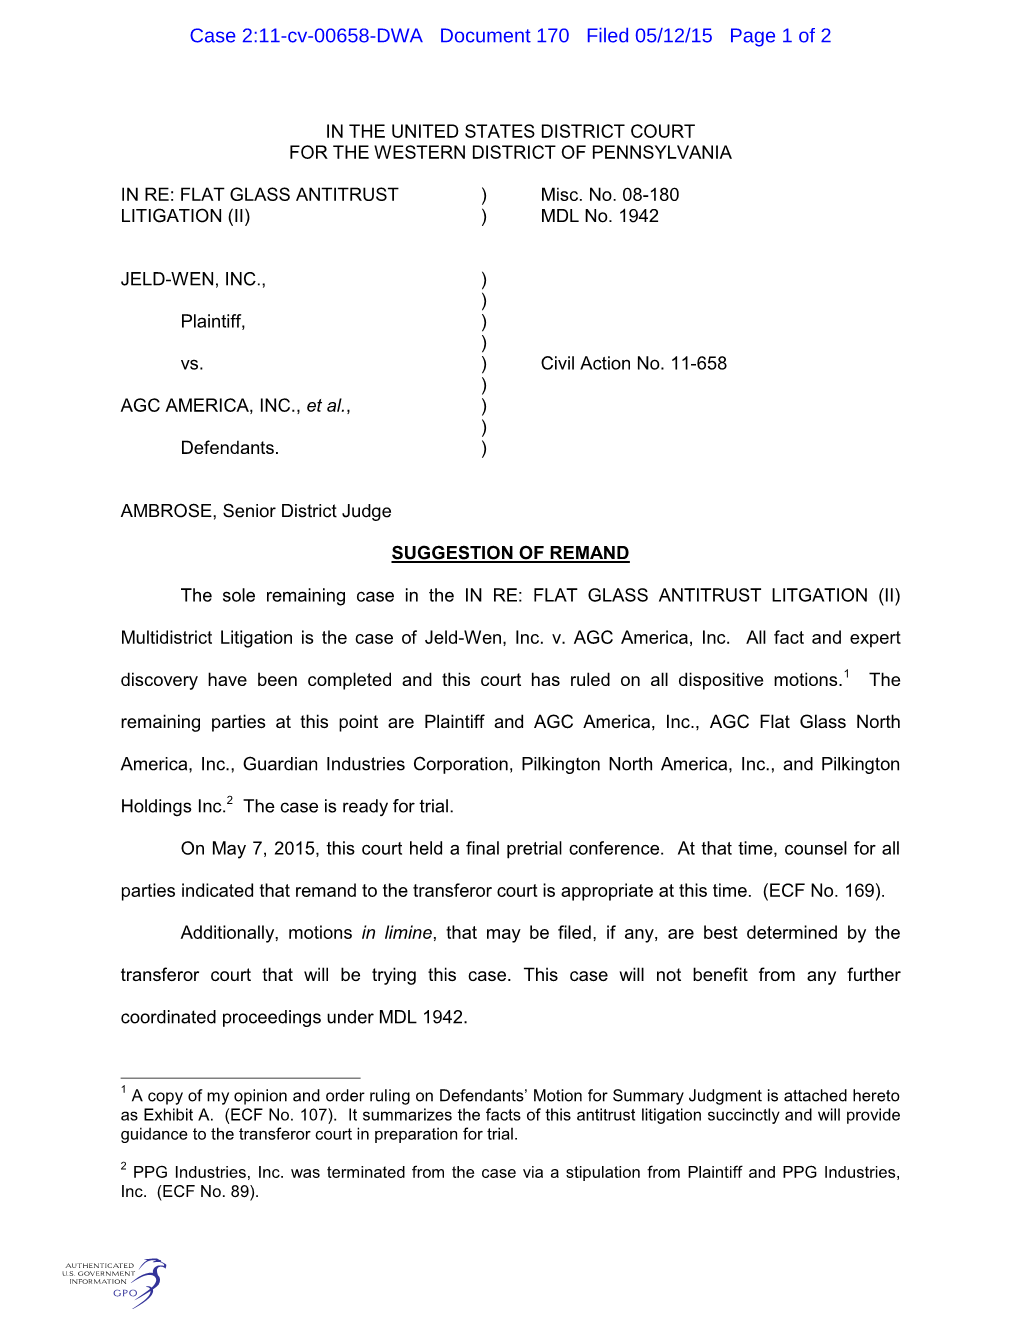 Case 2:11-Cv-00658-DWA Document 170 Filed 05/12/15 Page 1 of 2